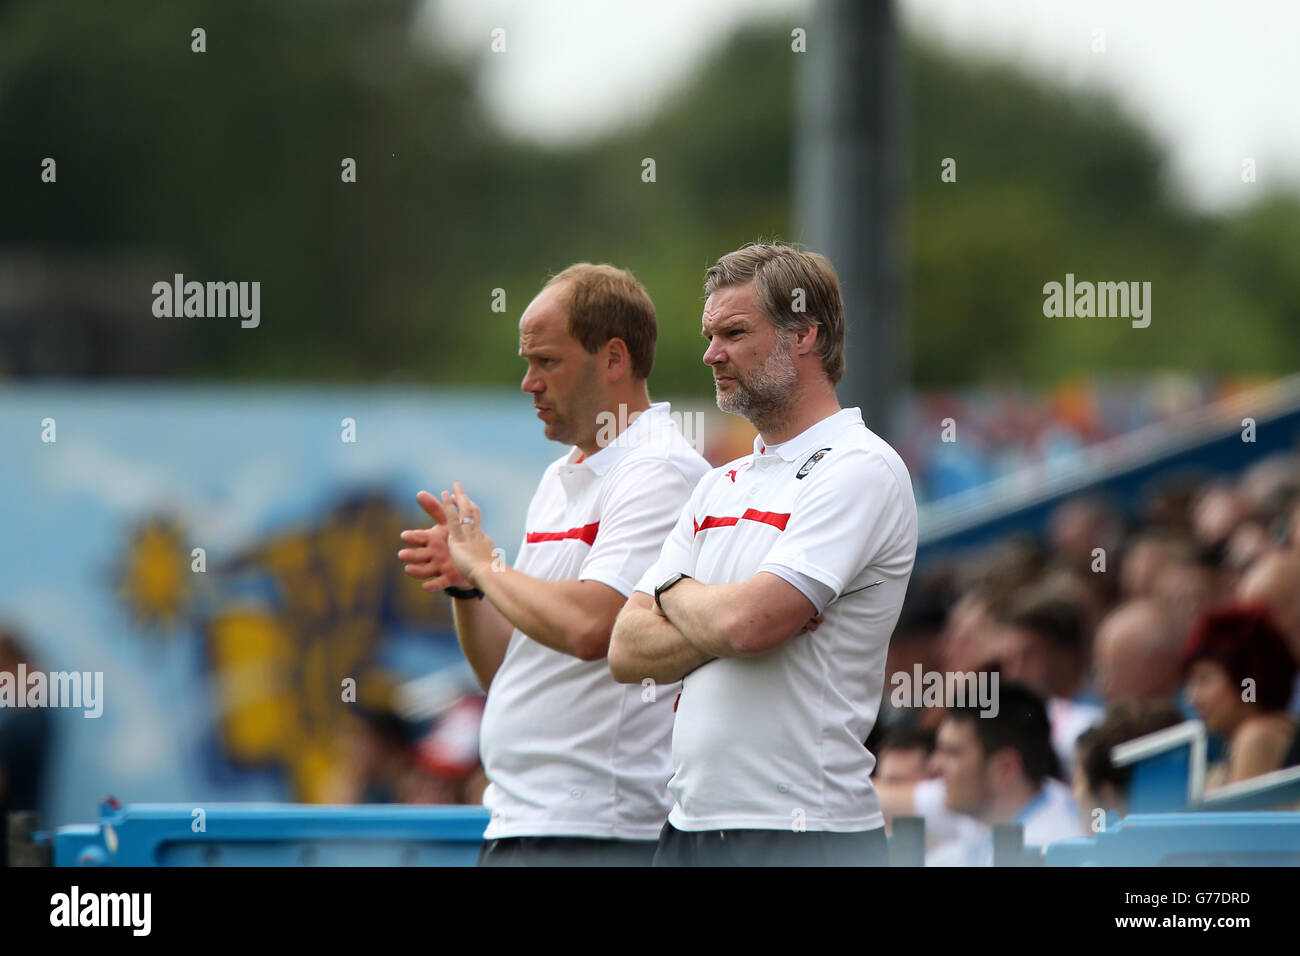 Soccer - Pre Season Friendly - Nuneaton Town v Coventry City - Liberty Way. Coventry City's manager Steven Pressley (right) and assistant manager Neil McFarland on the touchline Stock Photo